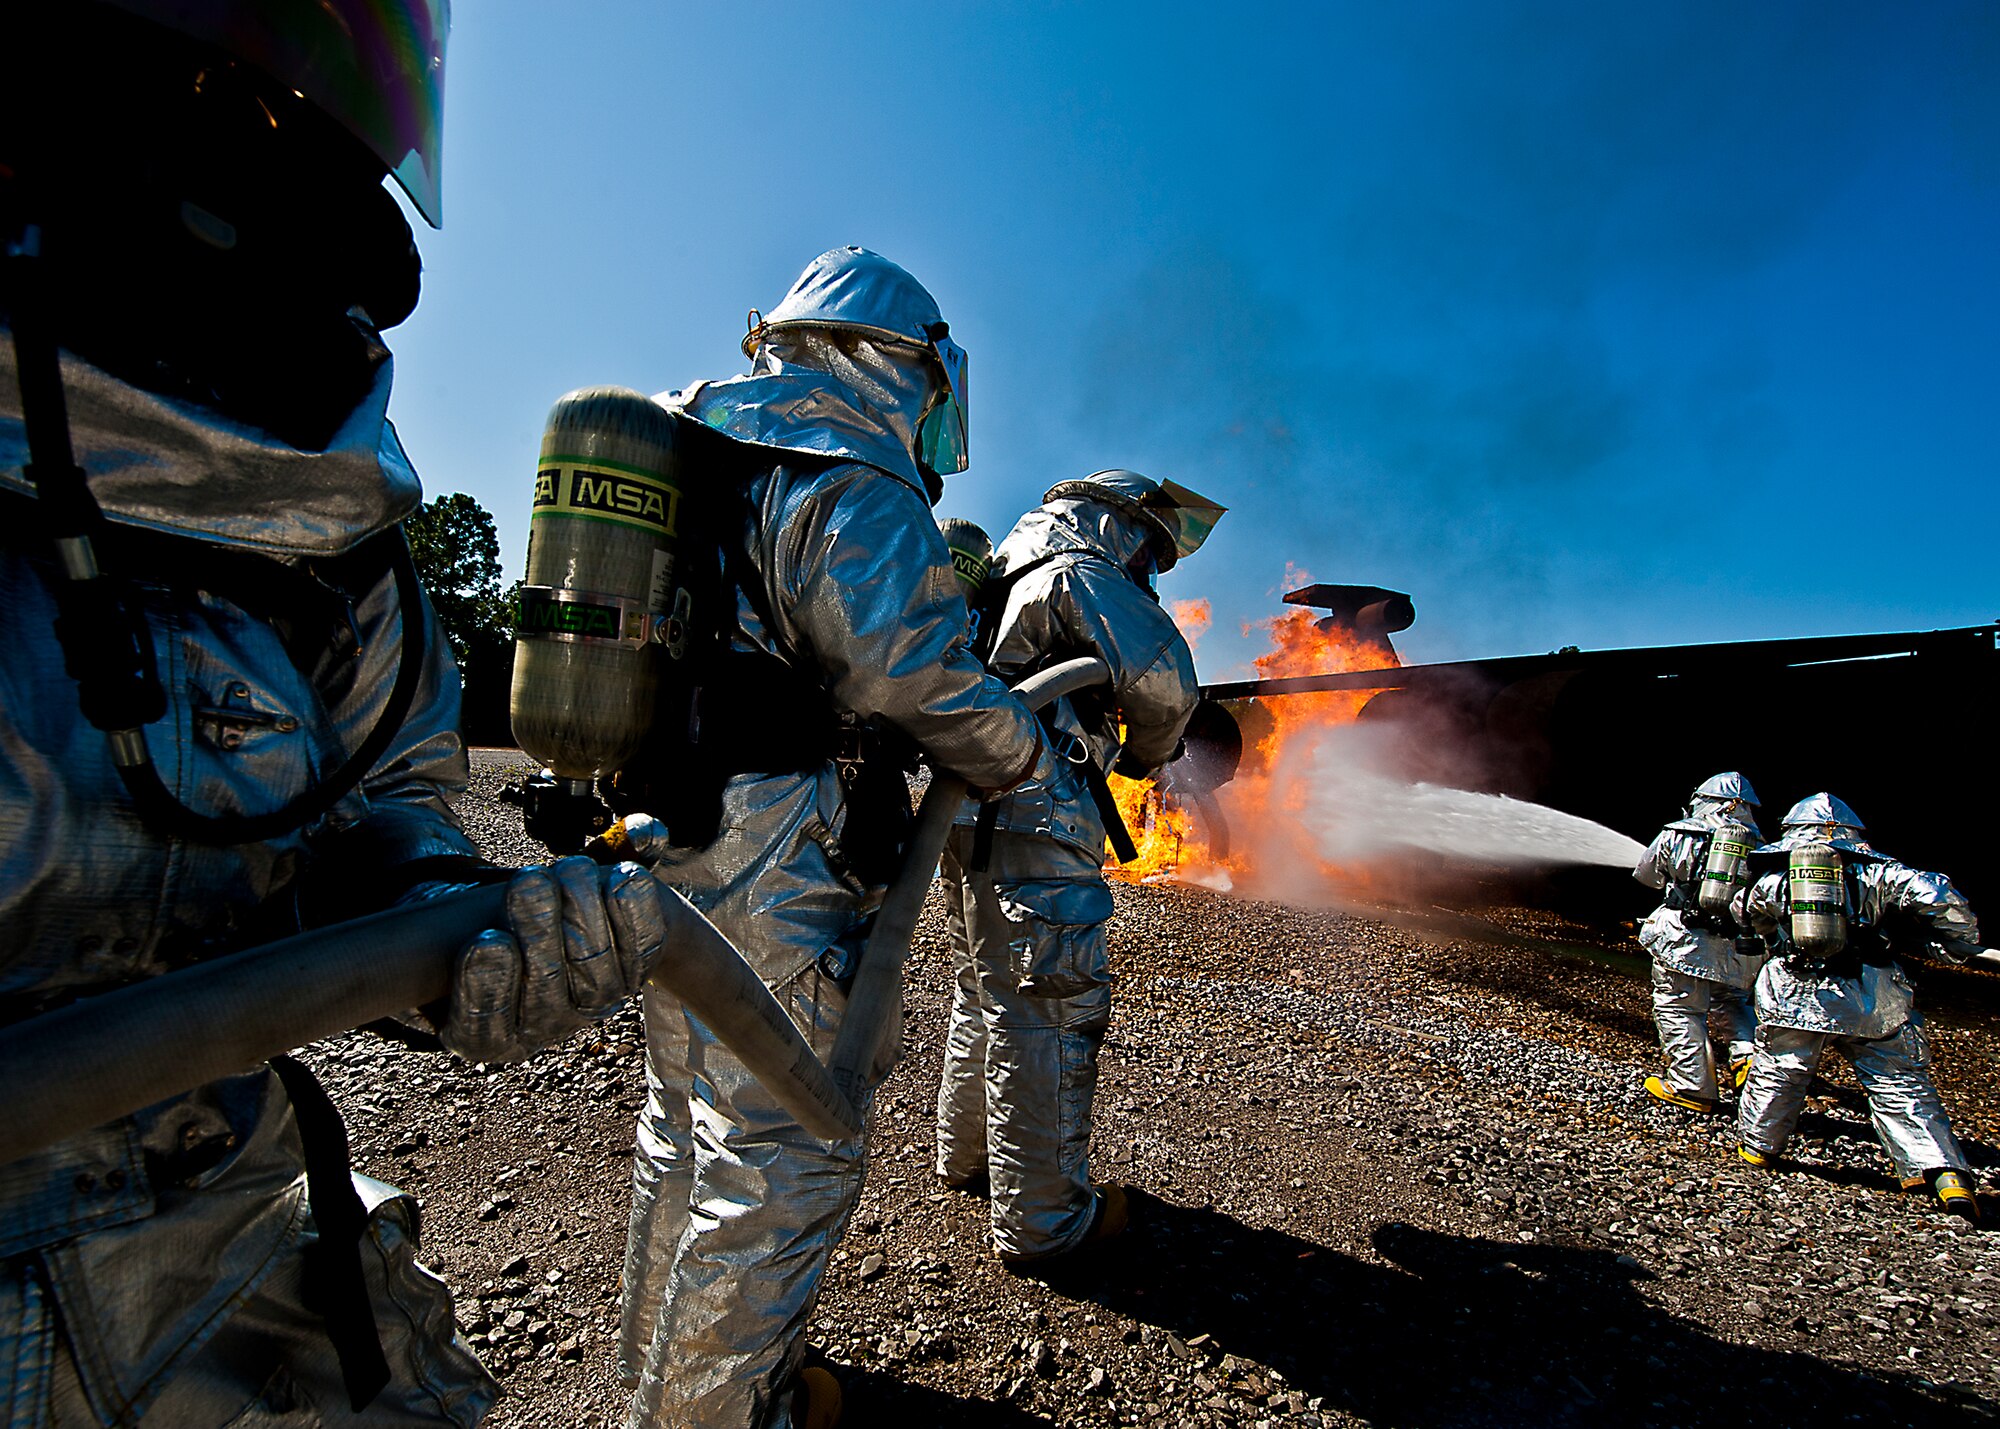 Teams of firefighters from the 919th Special Operations Wing fight a blaze on an aircraft engine during a fire training scenario at Hurlburt Field, Fla., April 13.  More than 10 of Duke Field’s firemen braved the flames of the aircraft burn pit for this annual refresher training.  (U.S. Air Force photo/Tech. Sgt. Samuel King Jr.)